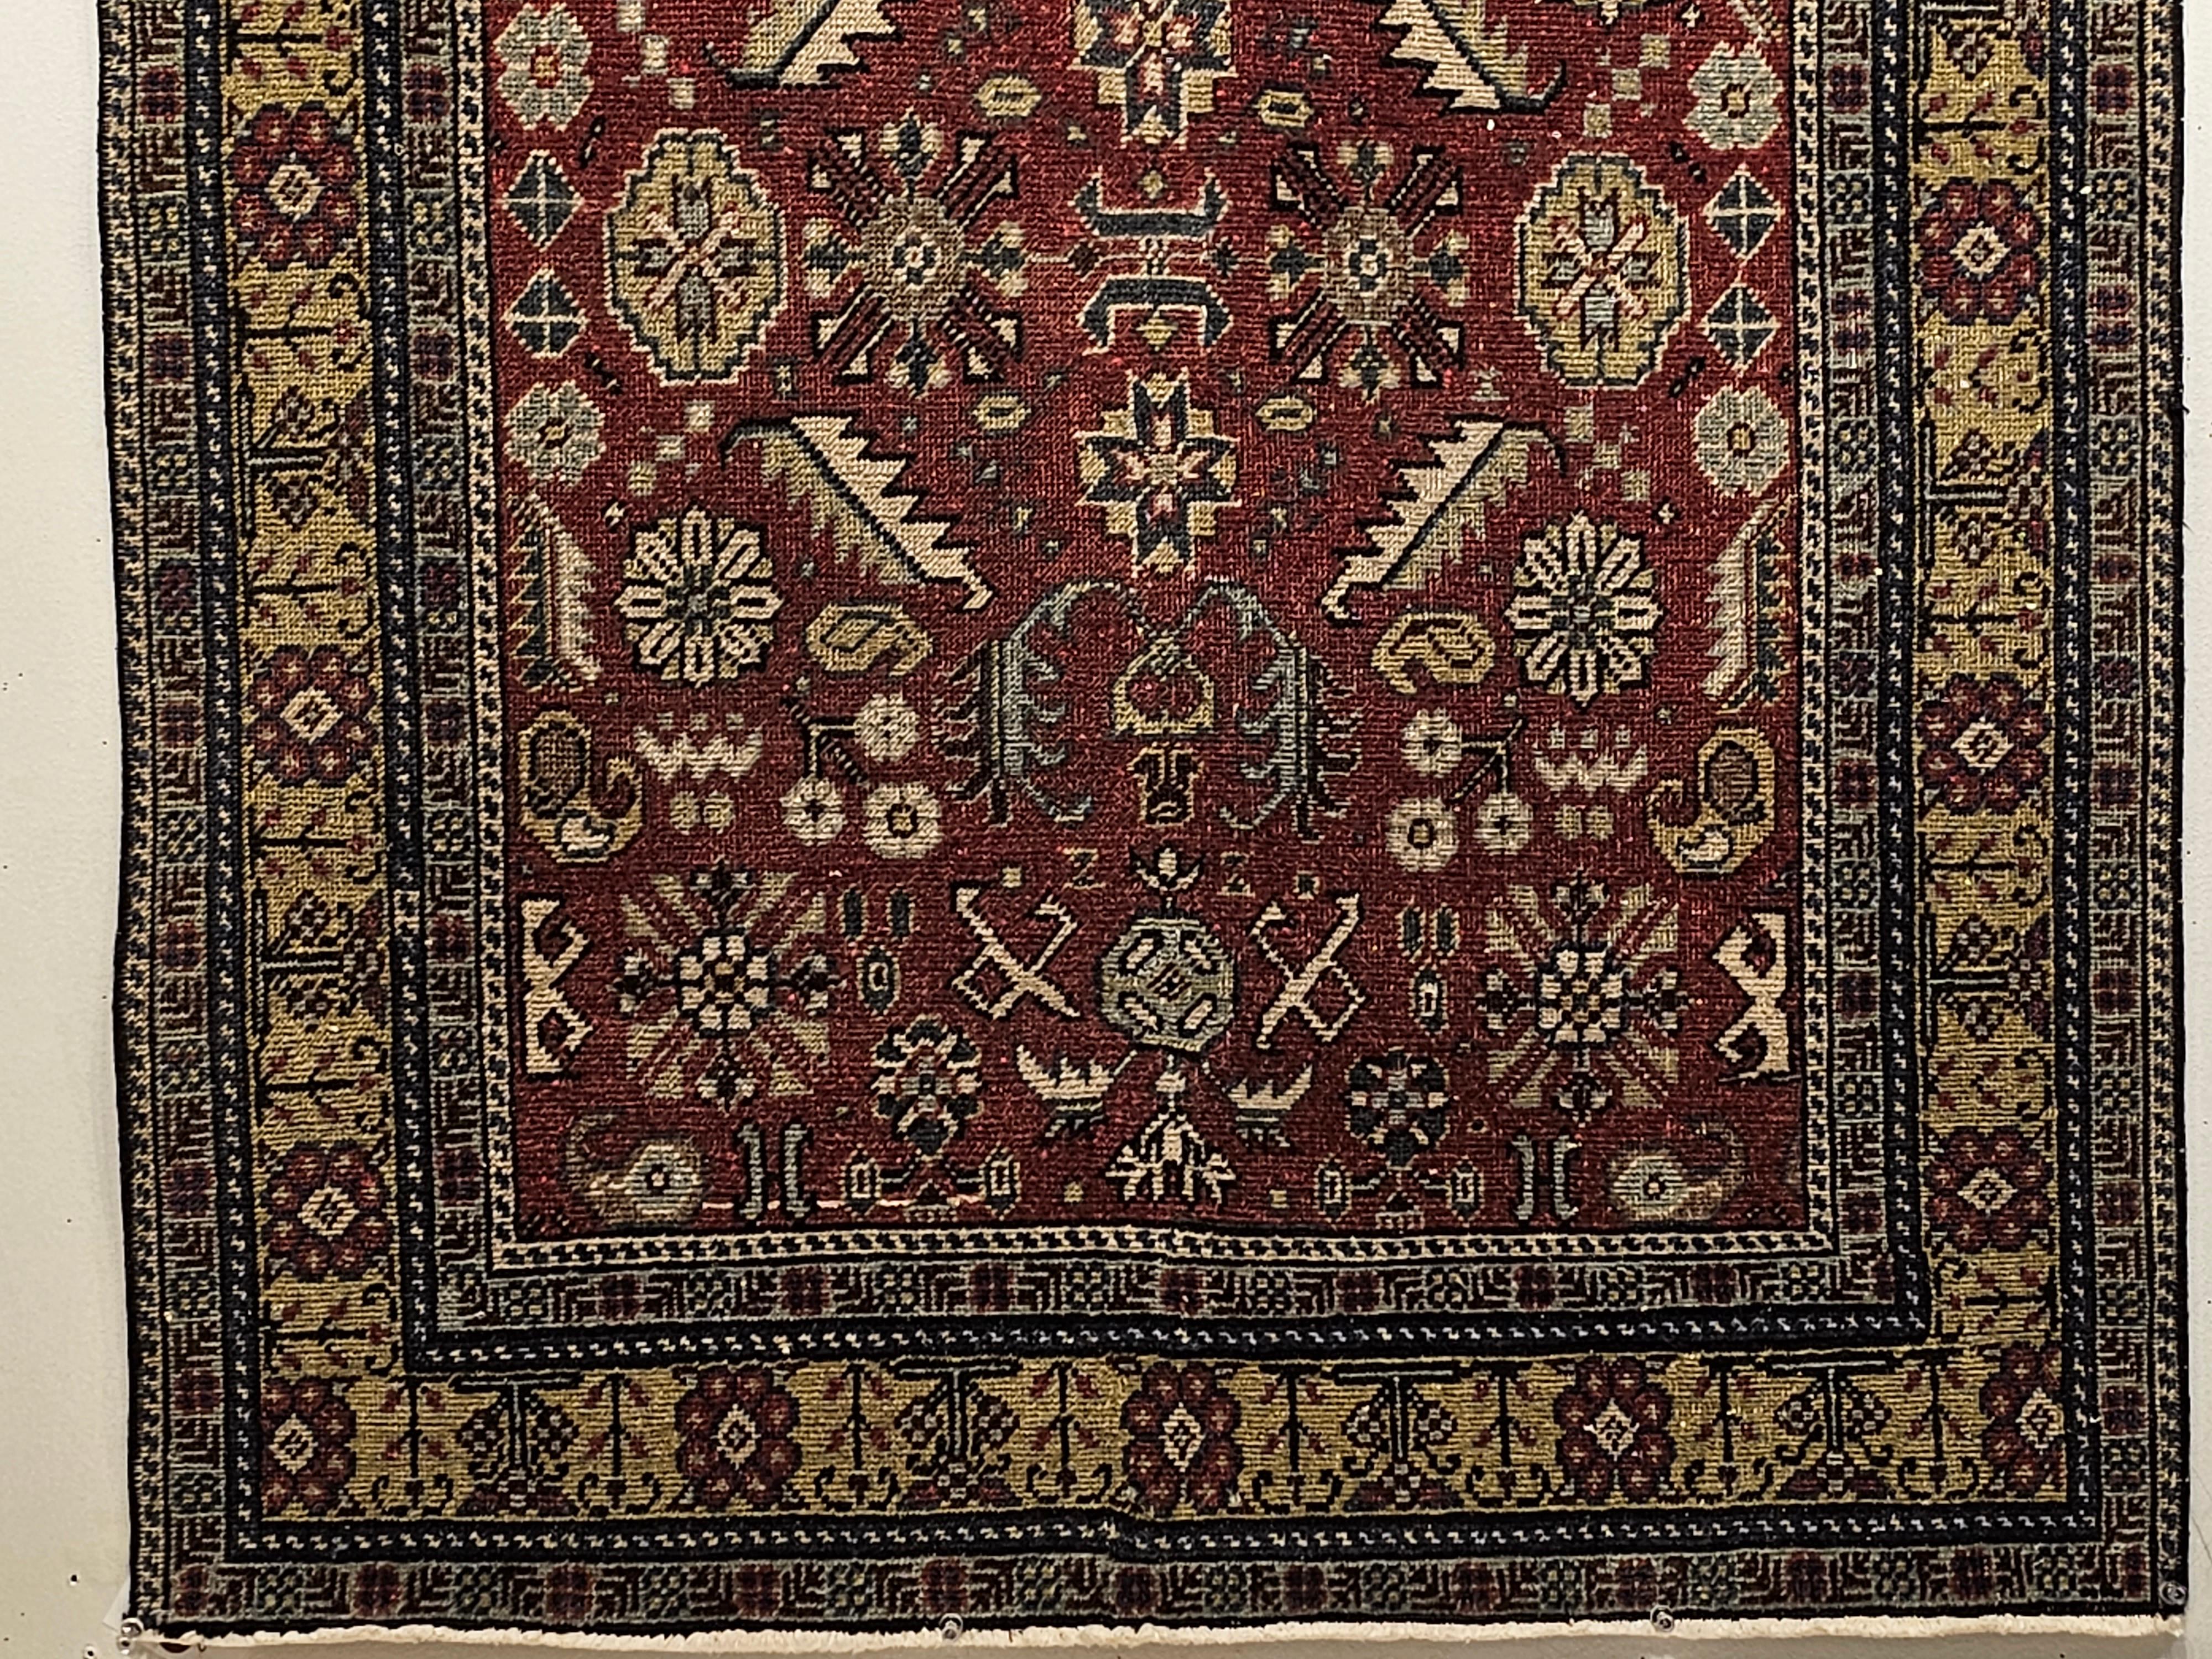 Turkmen Vintage Khotan Area Rug in Allover Geometric Pattern on Brick Red, Yellow, Ivory For Sale